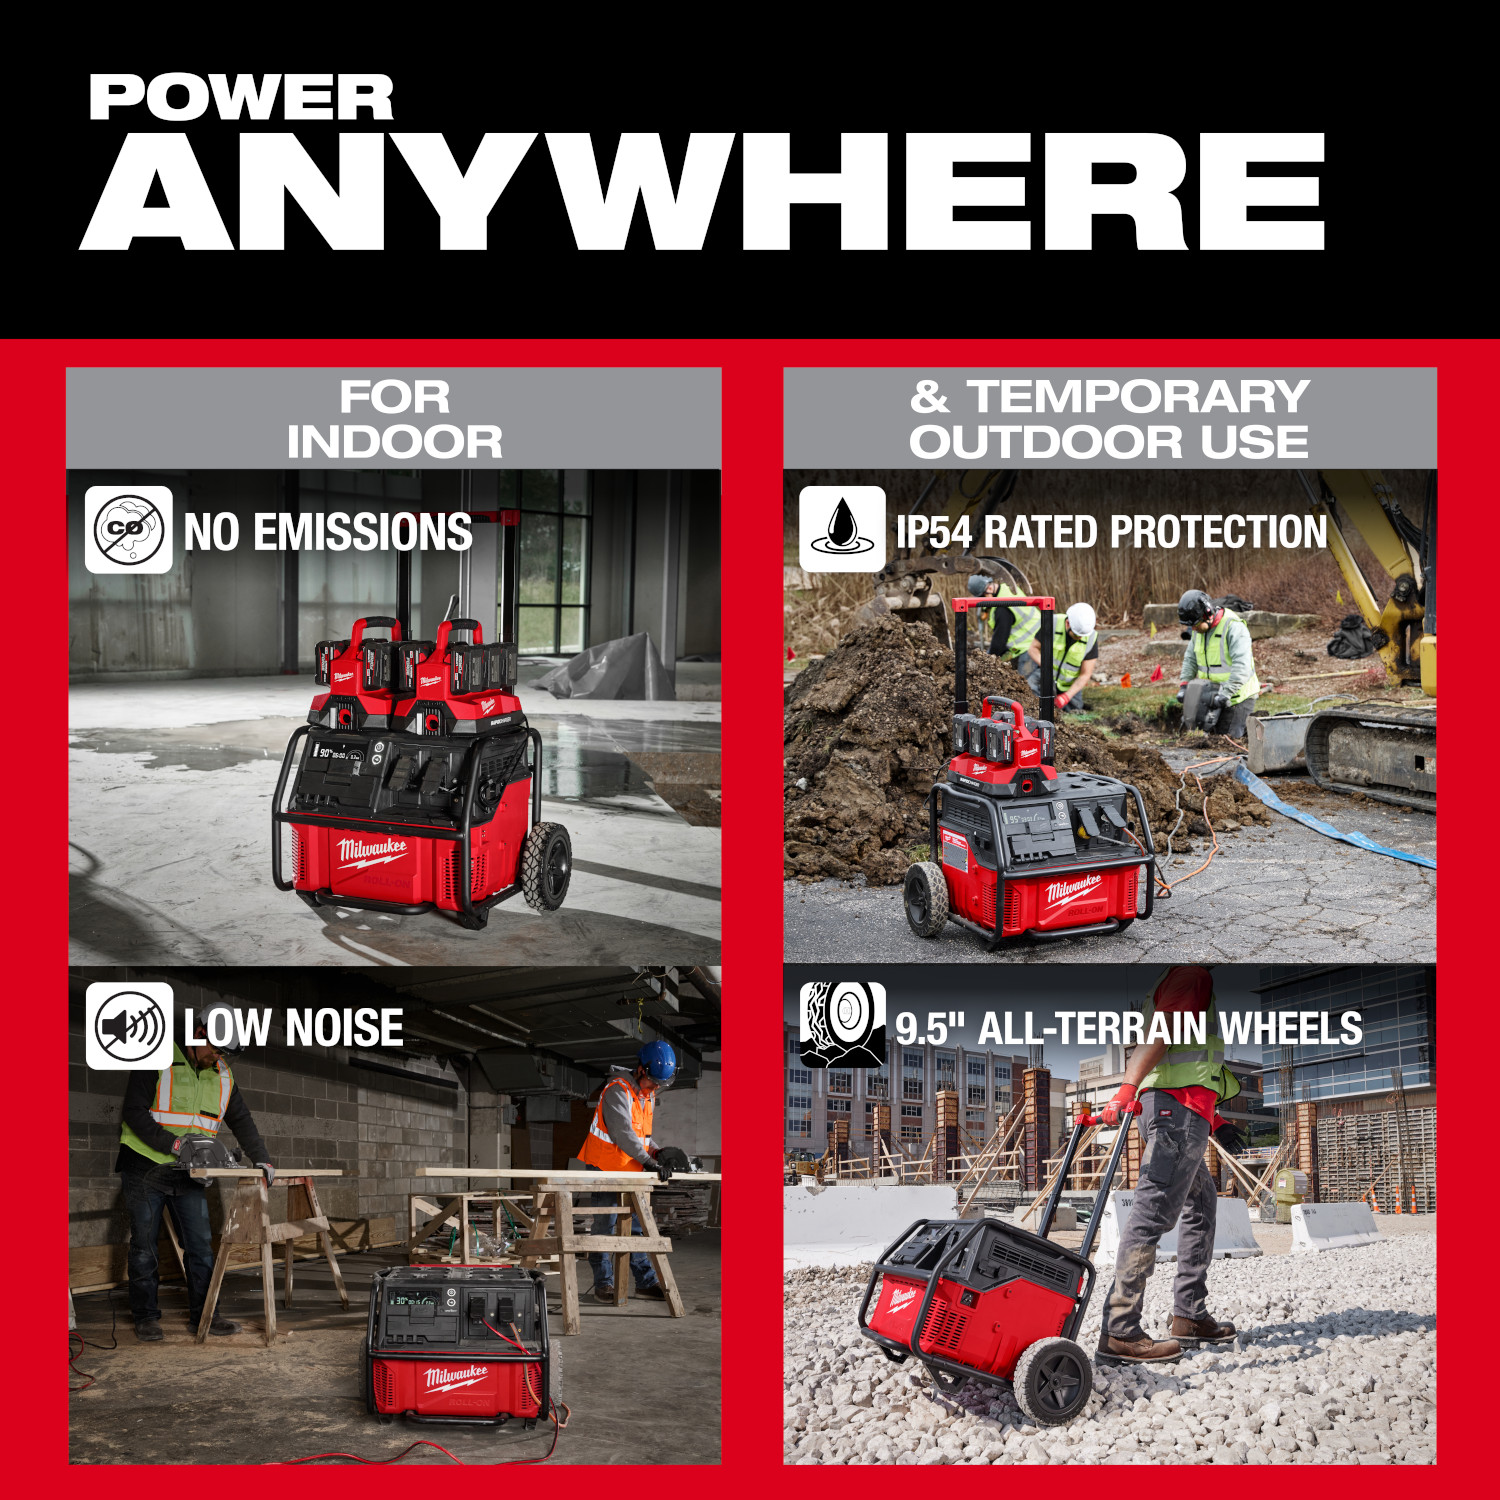 Milwaukee 3300R ROLL-ON 7200W/3600W 2.5kWh Power Supply from Columbia Safety